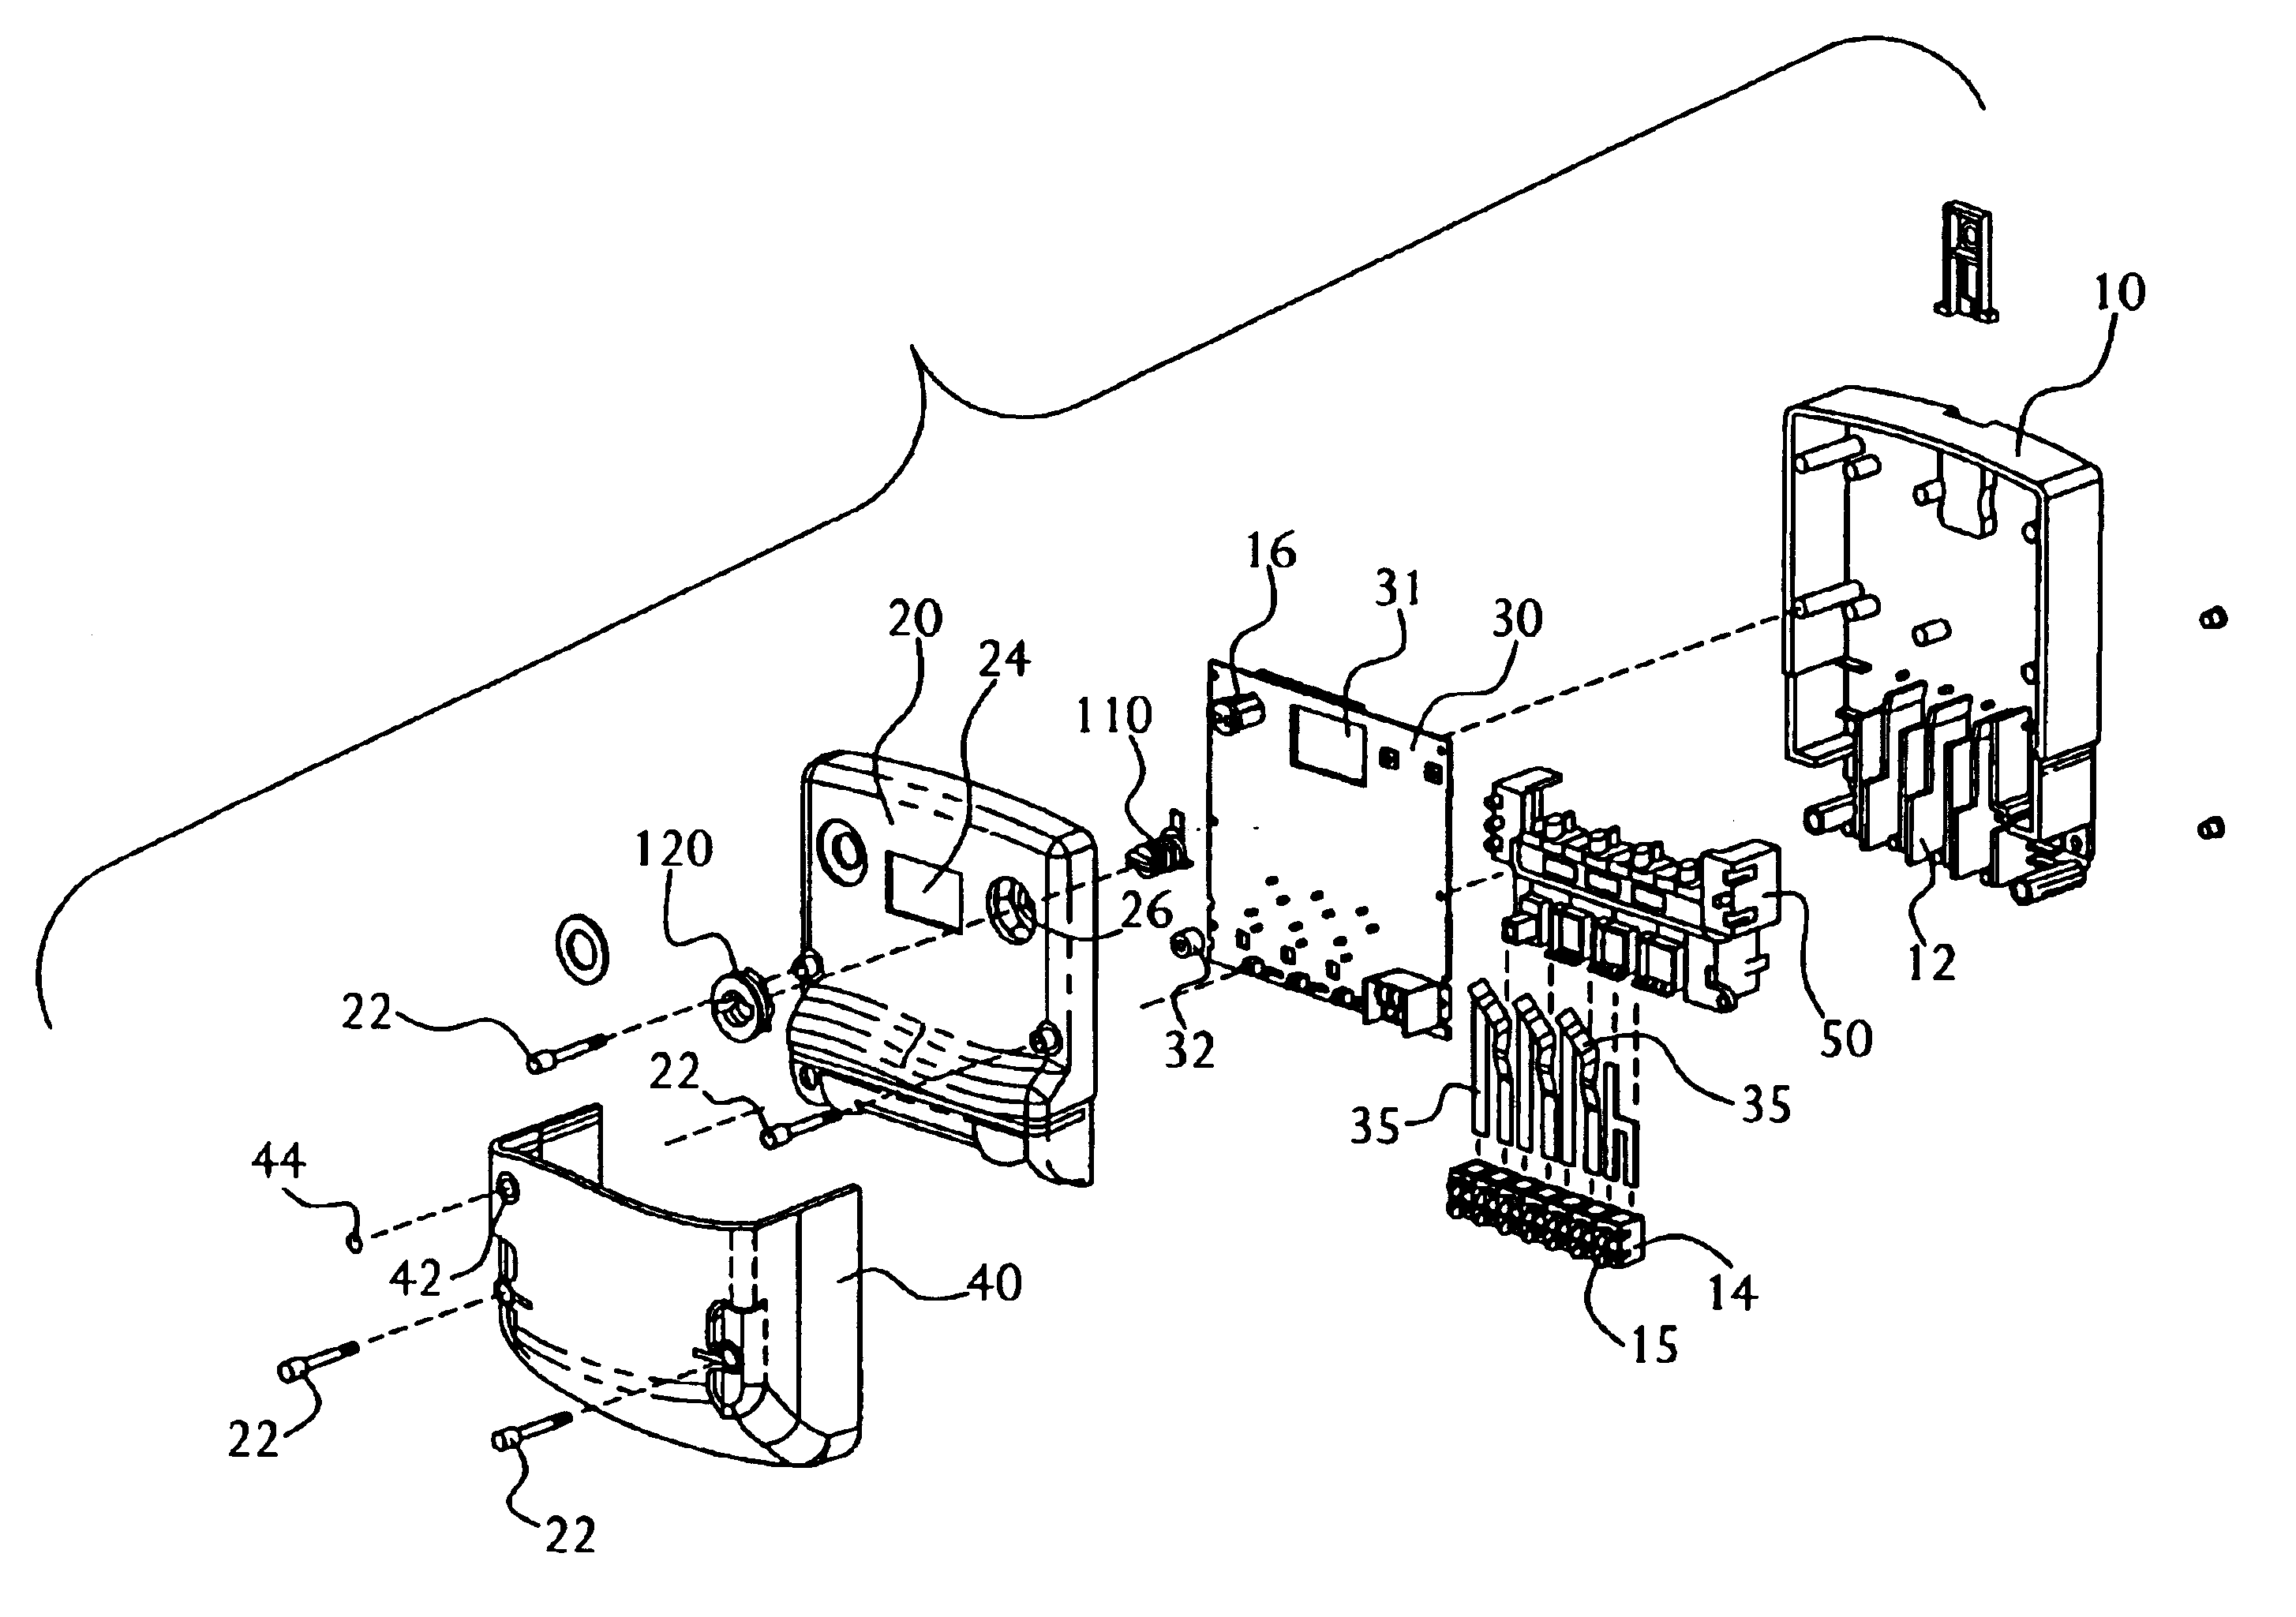 Advanced instrument packaging for electronic energy meter